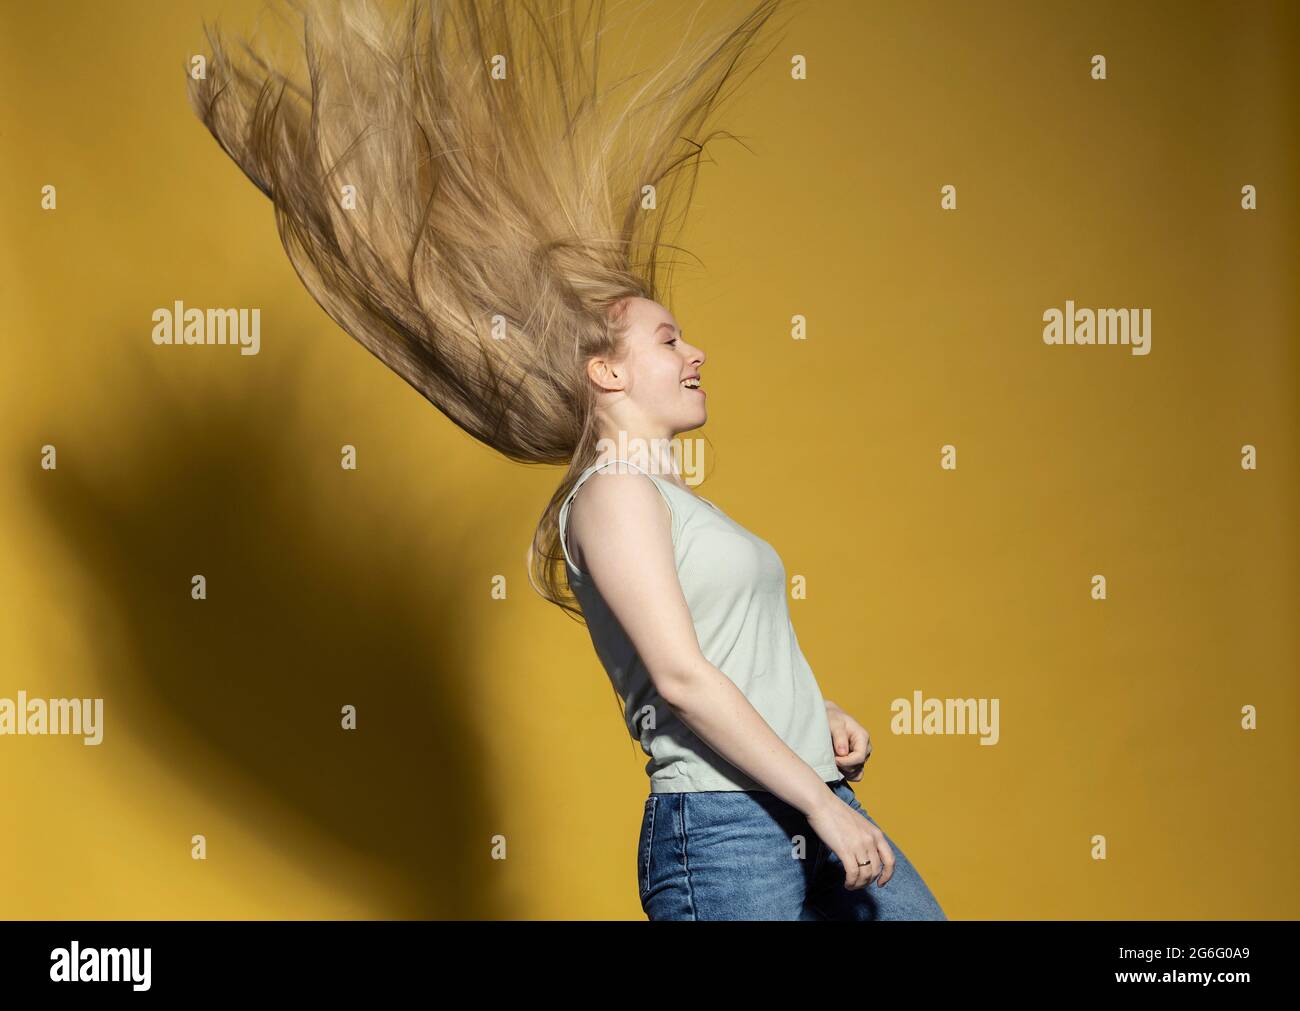 Carefree young woman flipping long blonde hair against yellow background Stock Photo